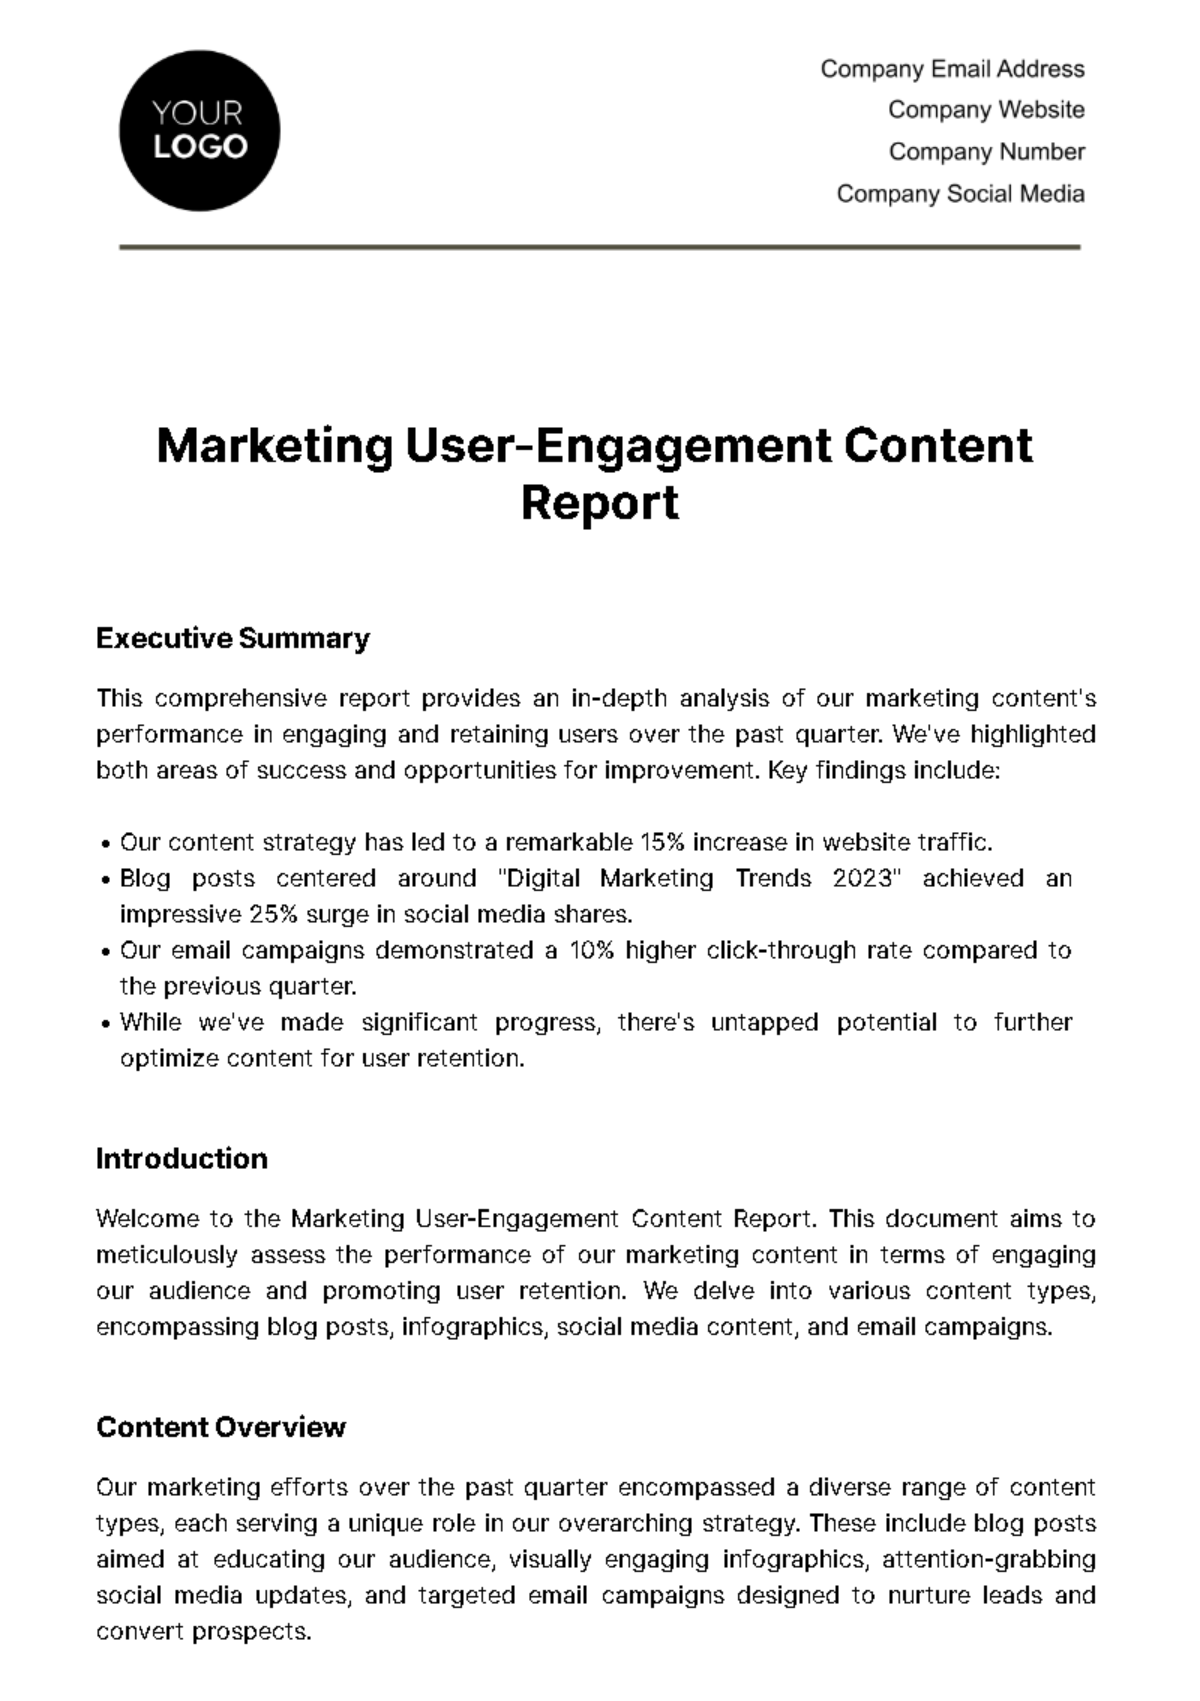 Free Marketing User-Engagement Content Report Template